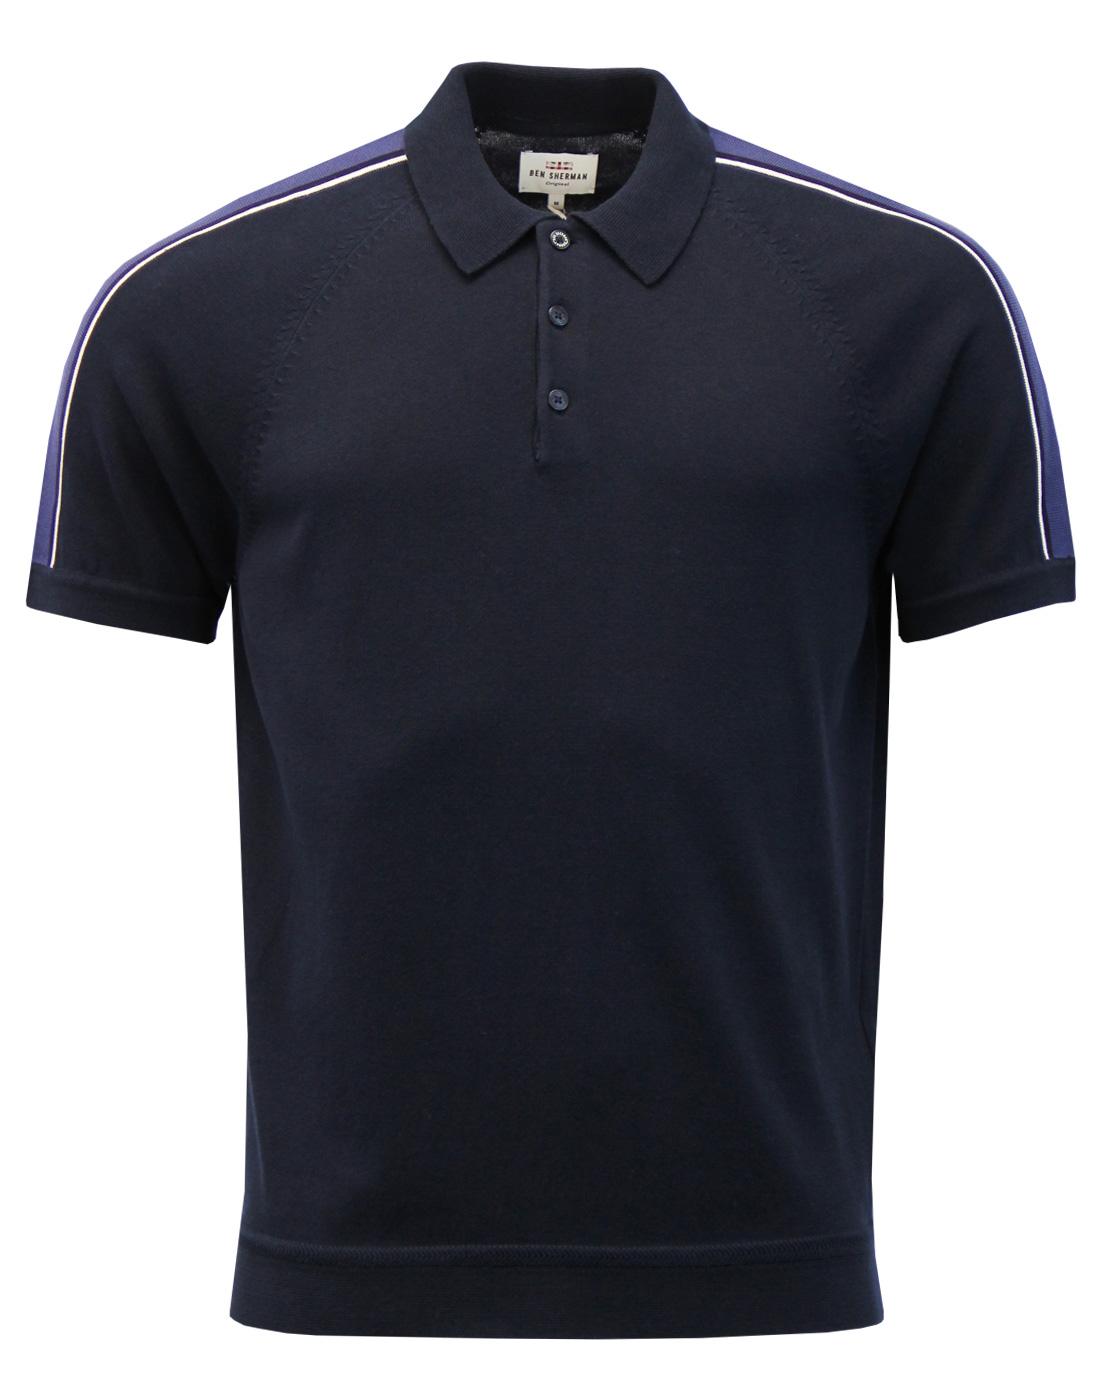 BEN SHERMAN Men's Retro 60s Mod Piped Overarm Knitted Polo Shirt